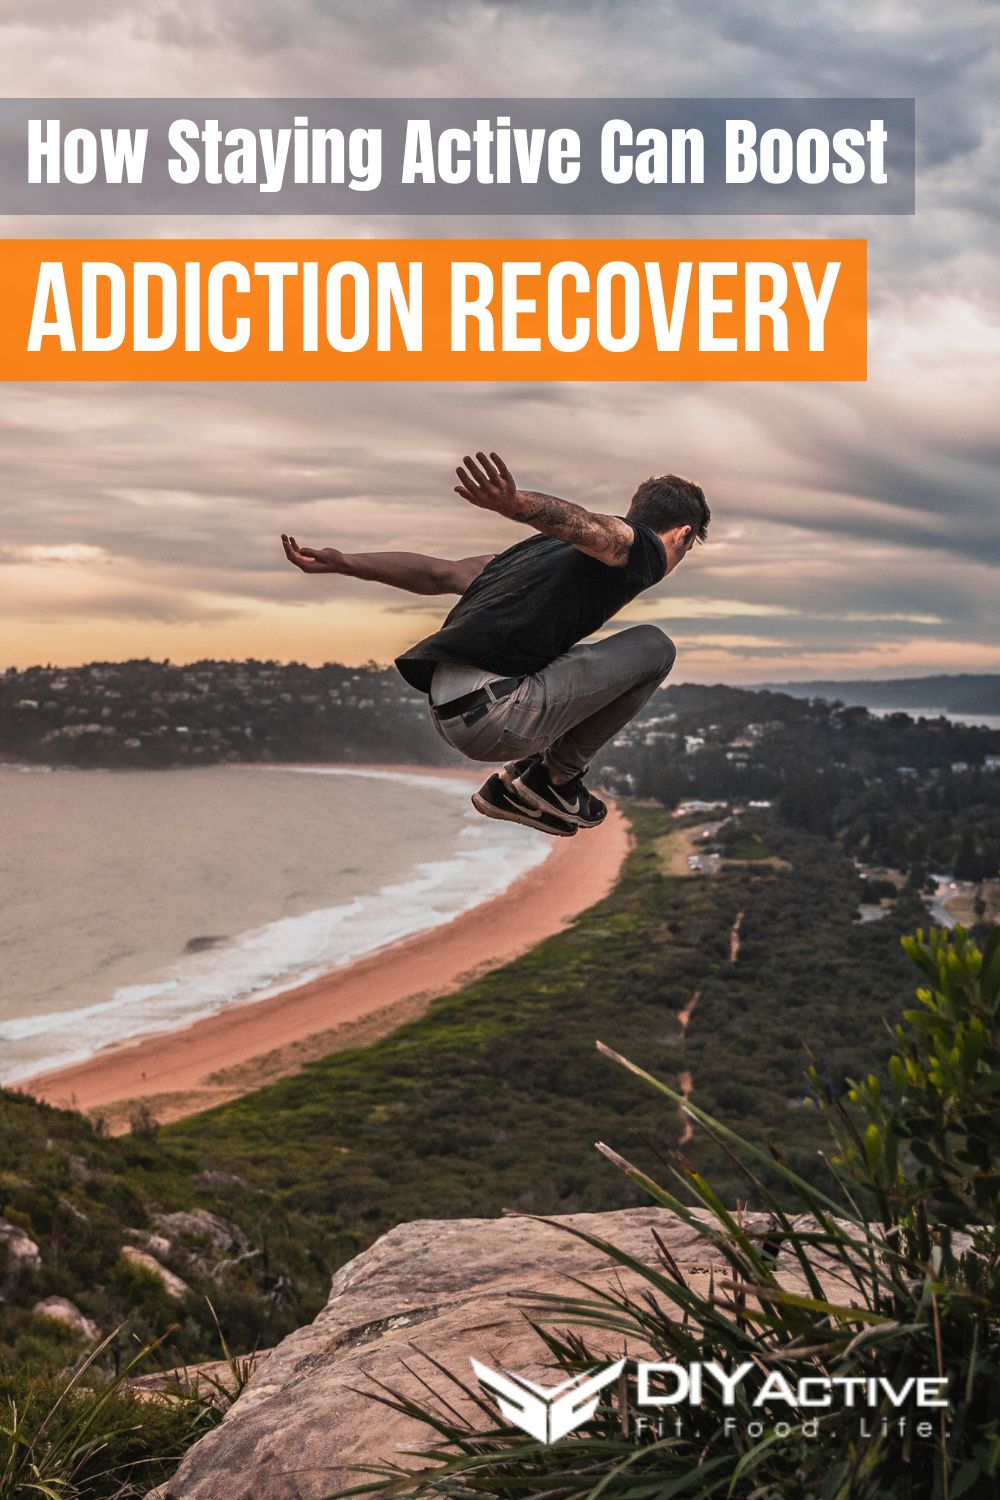 How Staying Active Can Boost Your Addiction Recovery Journey